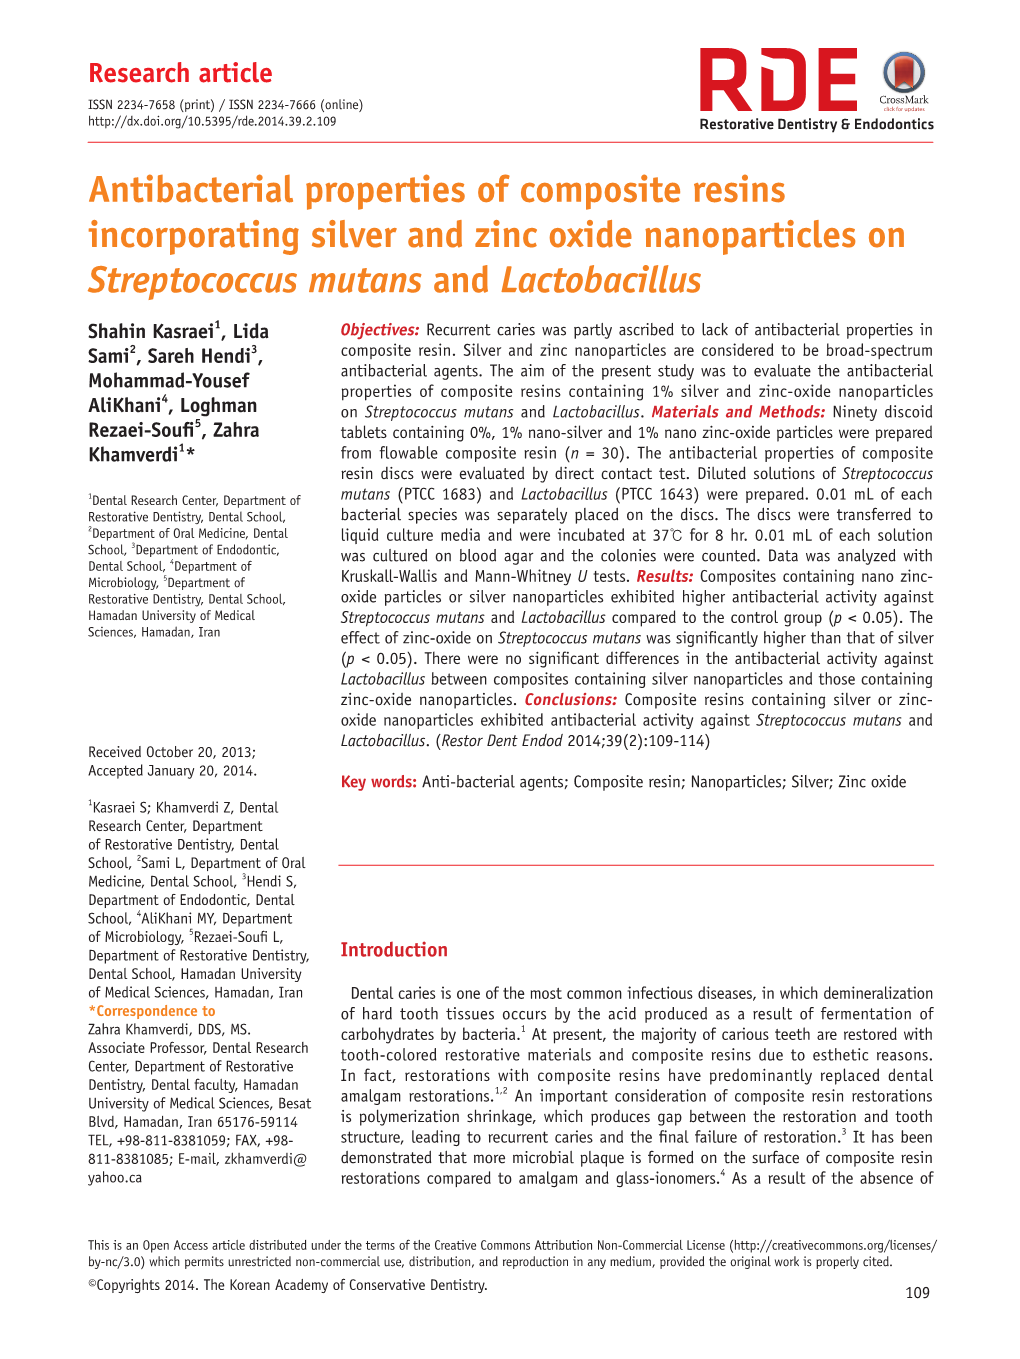 Antibacterial Properties of Composite Resins Incorporating Silver and Zinc Oxide Nanoparticles on Streptococcus Mutans and Lactobacillus